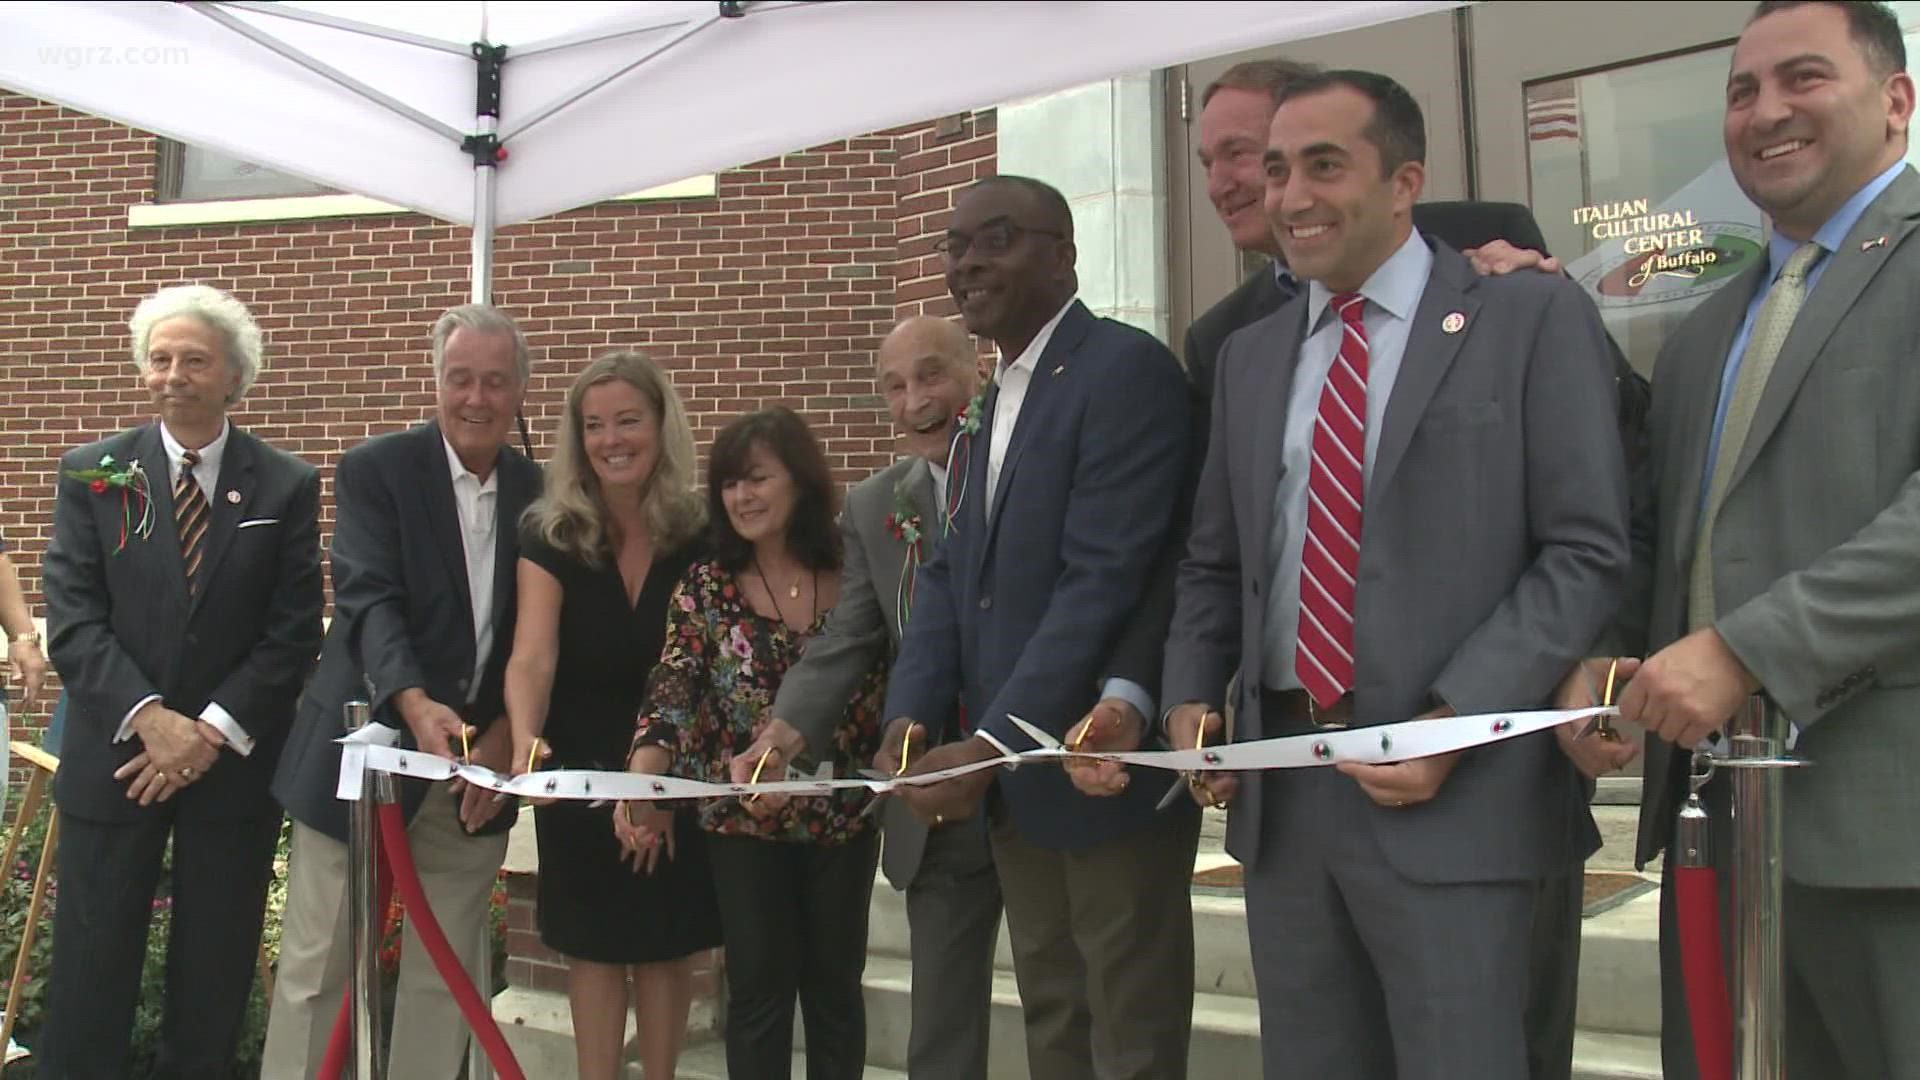 The ribbon was cut on the Italian Cultural Center at the corner of Hertel and Delaware. CCI Buffalo made it a mission to preserve history and look to the future.